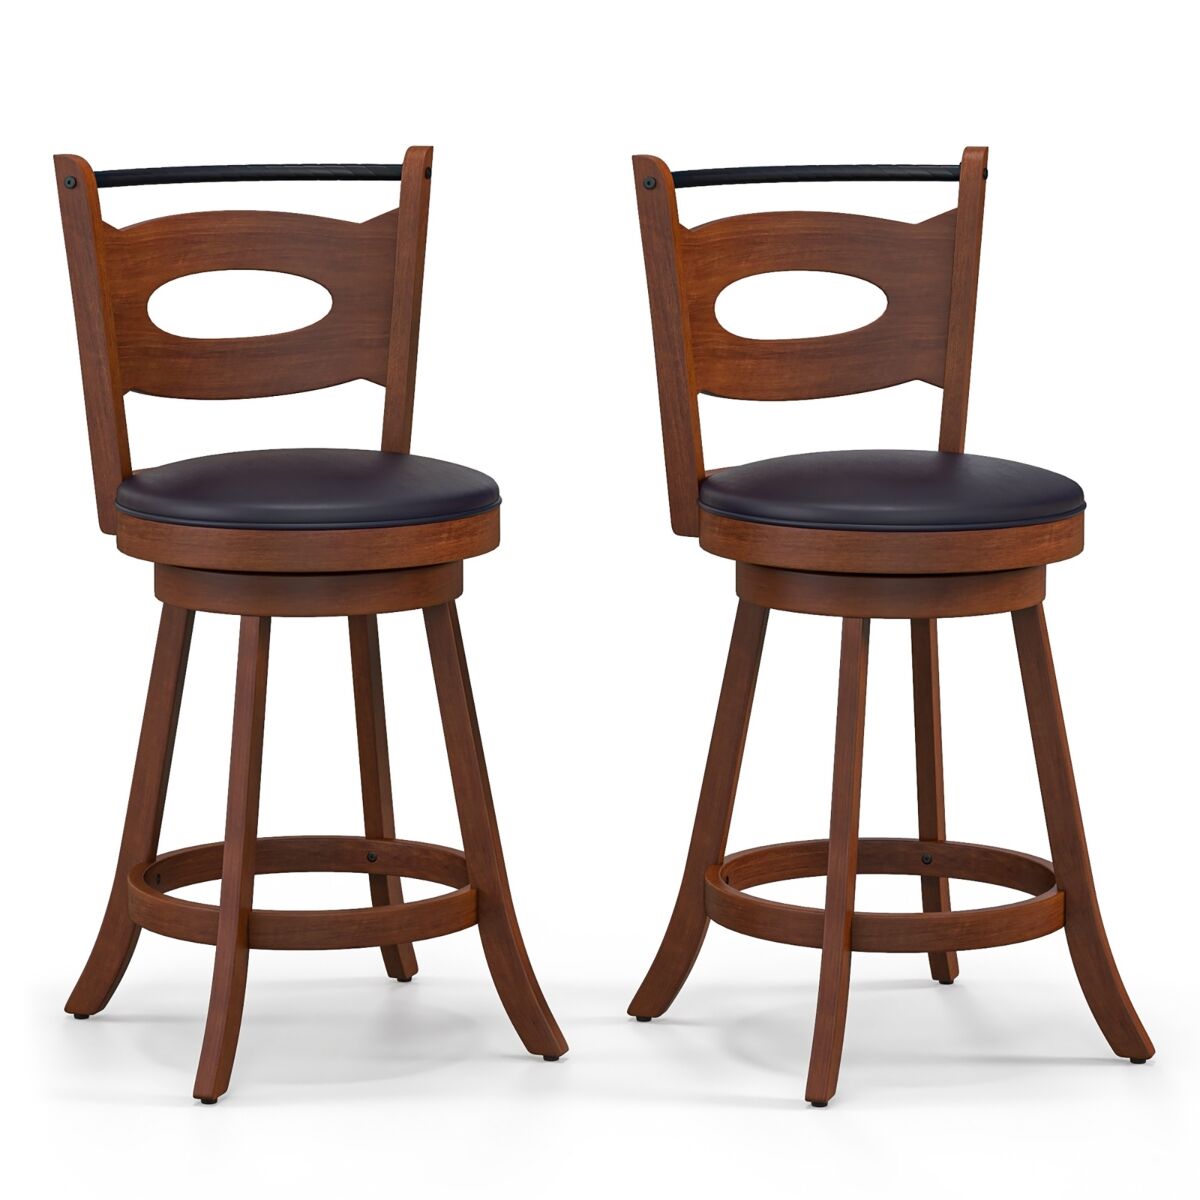 Costway Set of 2 Bar Stools 360° Swivel Dining Chairs Solid Rubber Wood Leather Padded Seat Counter Height - Brown